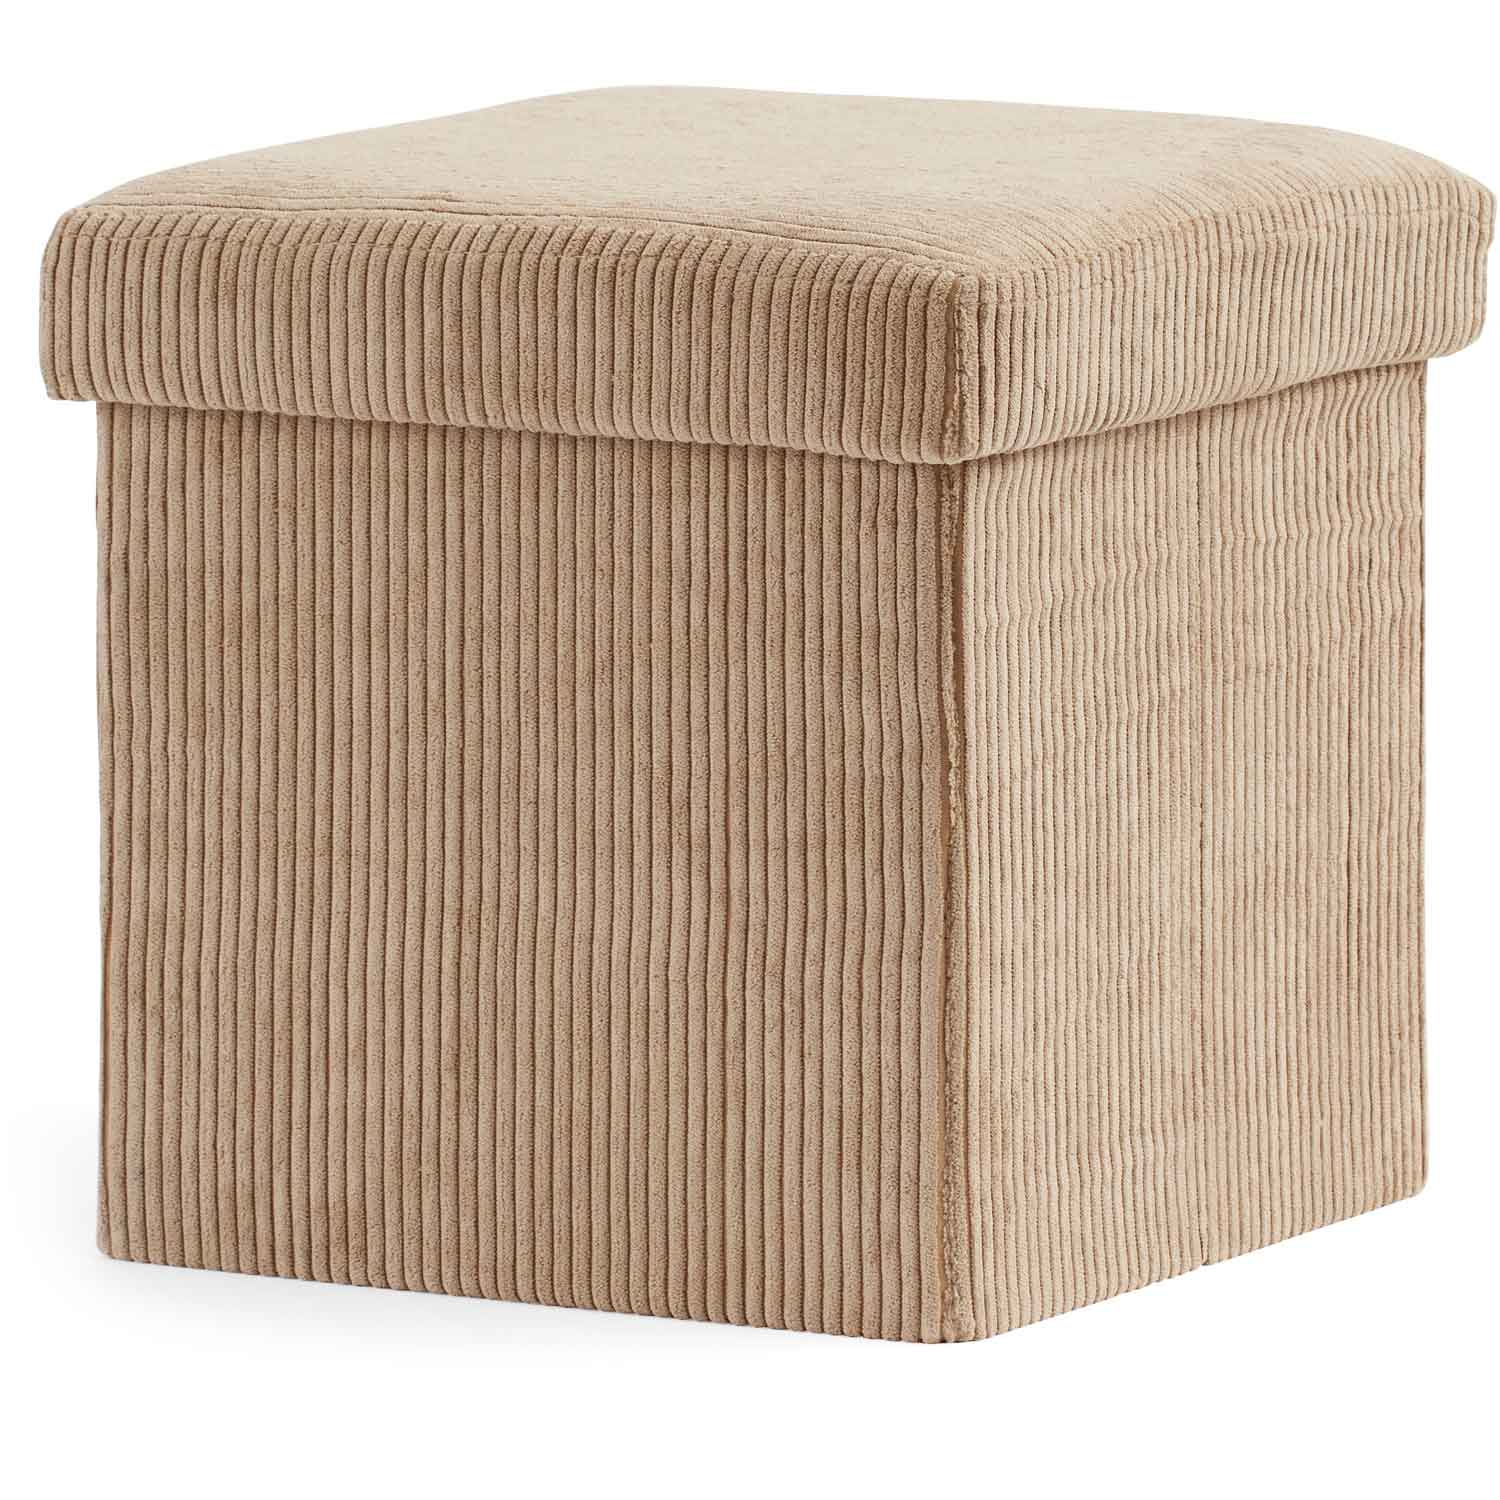 Seat Pouf With Storage, Manchester - Kids Concept @ RoyalDesign